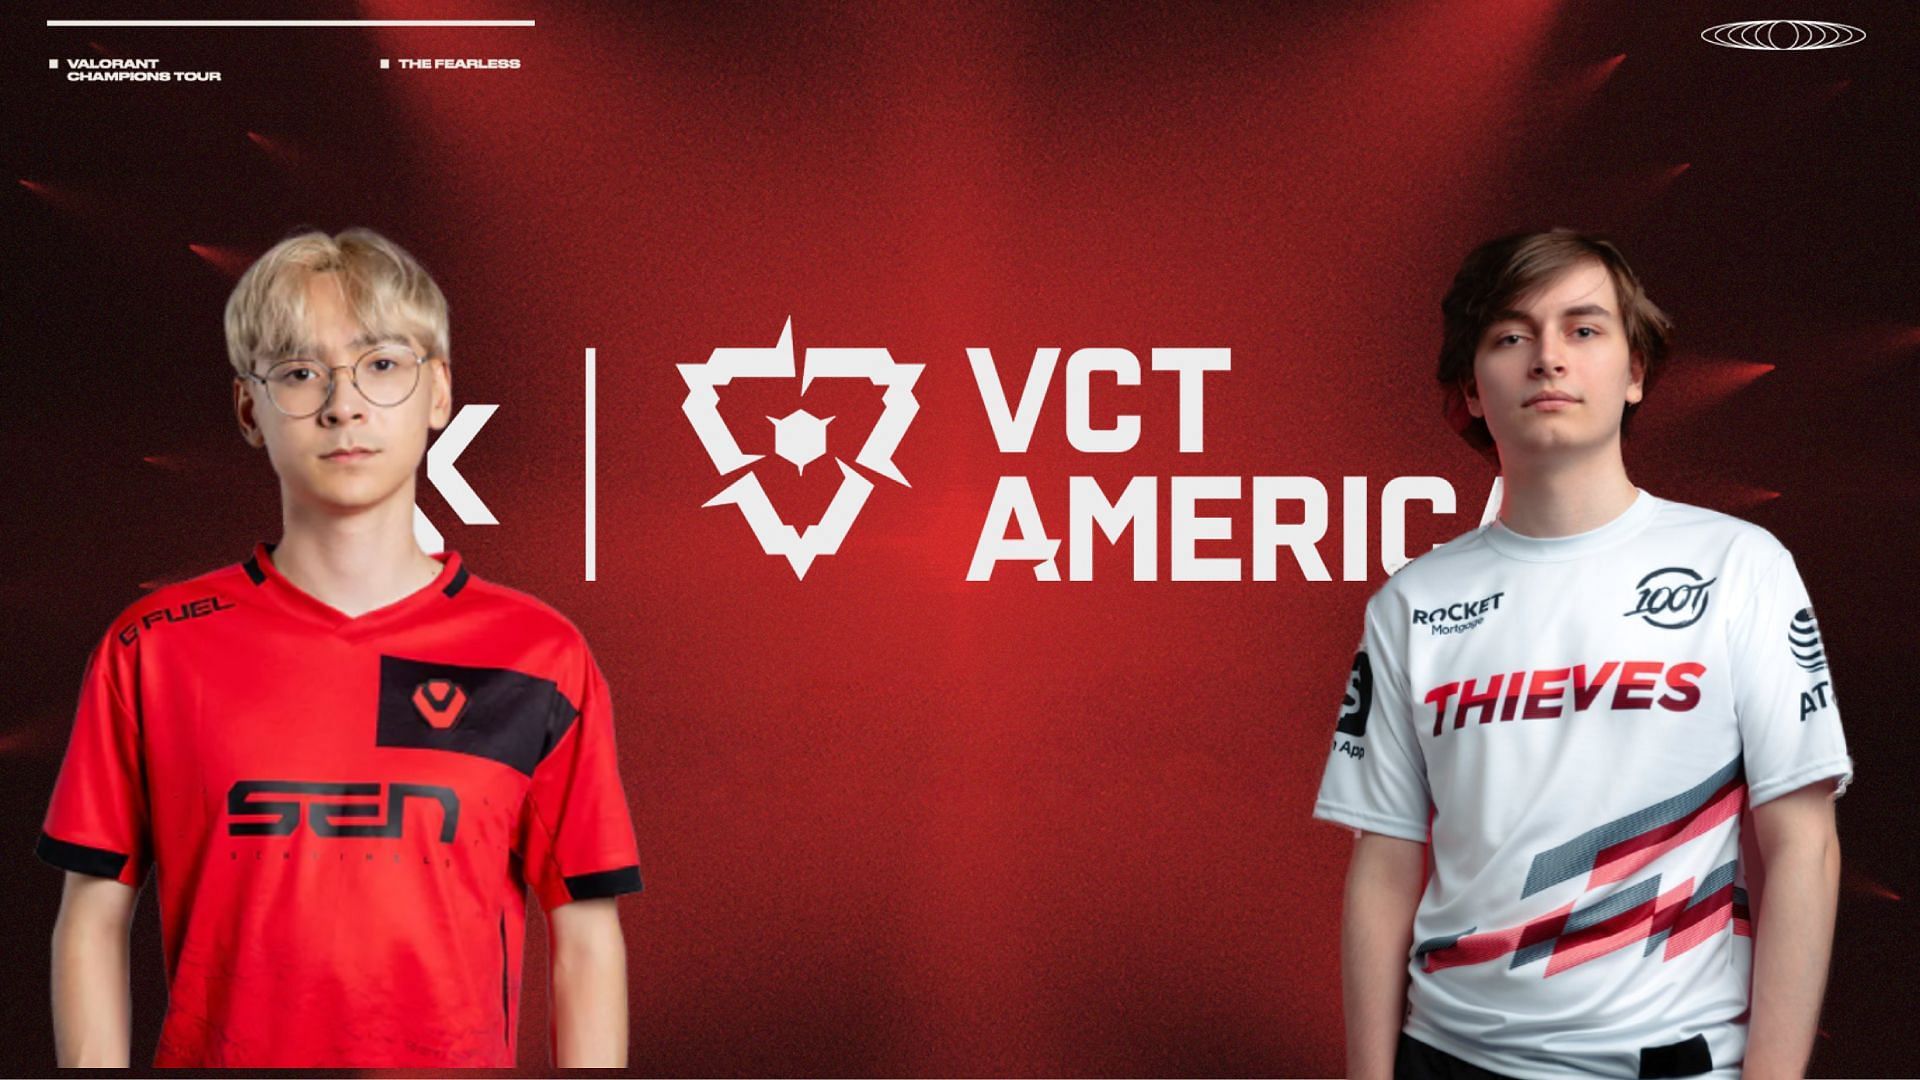 Sentinels vs 100 Thieves will take on each other on the first game of VCT Americas League 2023 (Image via Sportskeeda)